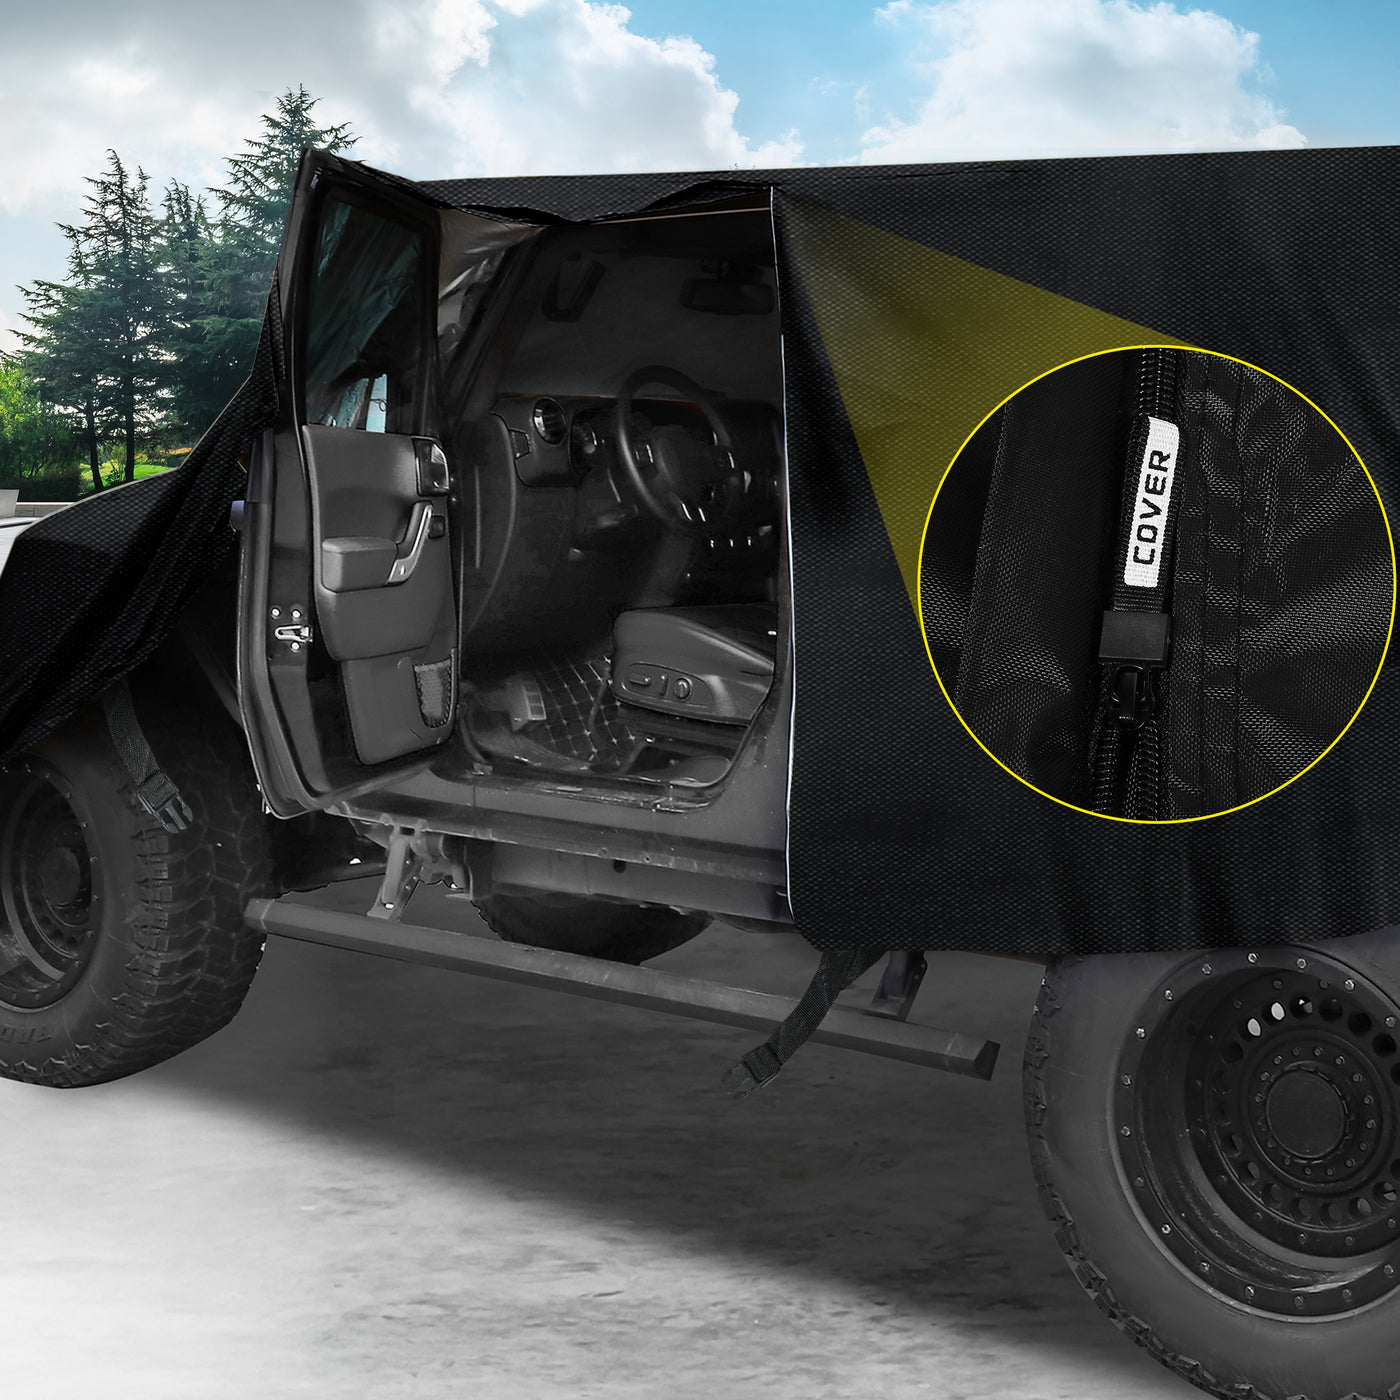 X AUTOHAUX SUV Car Cover Cab Cover Fit for Jeep Wrangler JK JL Hardtop 2 Door 2007-2021 Outdoor Sun Dust Wind Snow Protection 210D Oxford with Driver Door Zipper